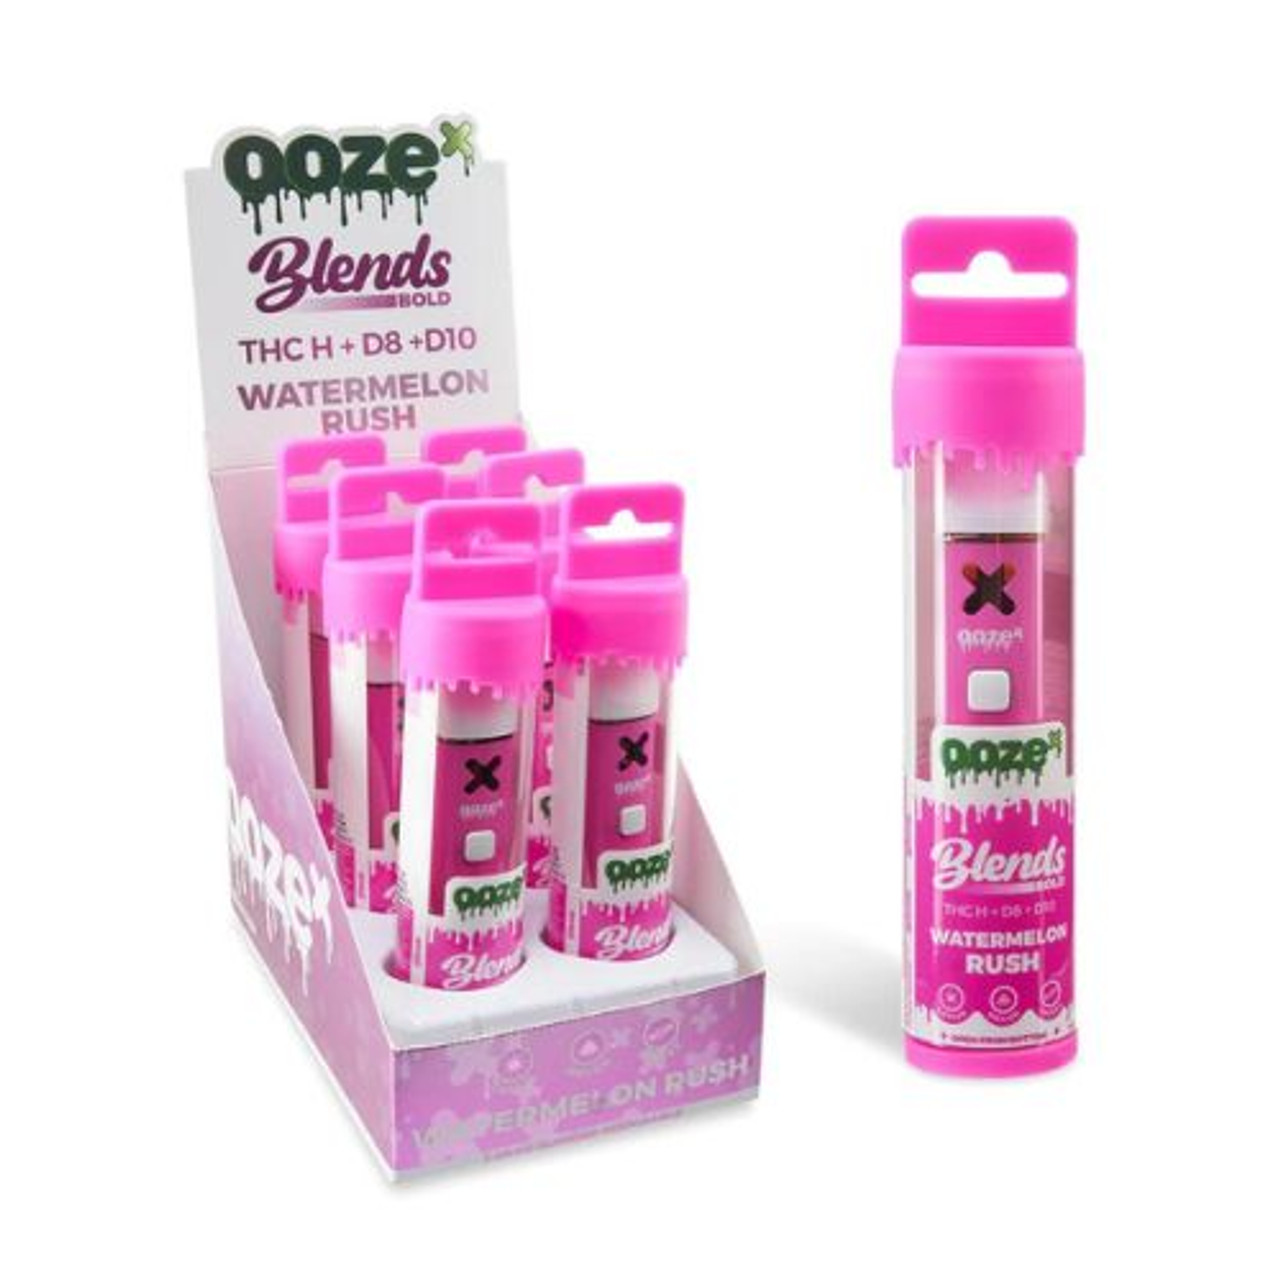 OozeX 2ml Disposable Delta Blends - Watermelon Rush - 6 ct. Display